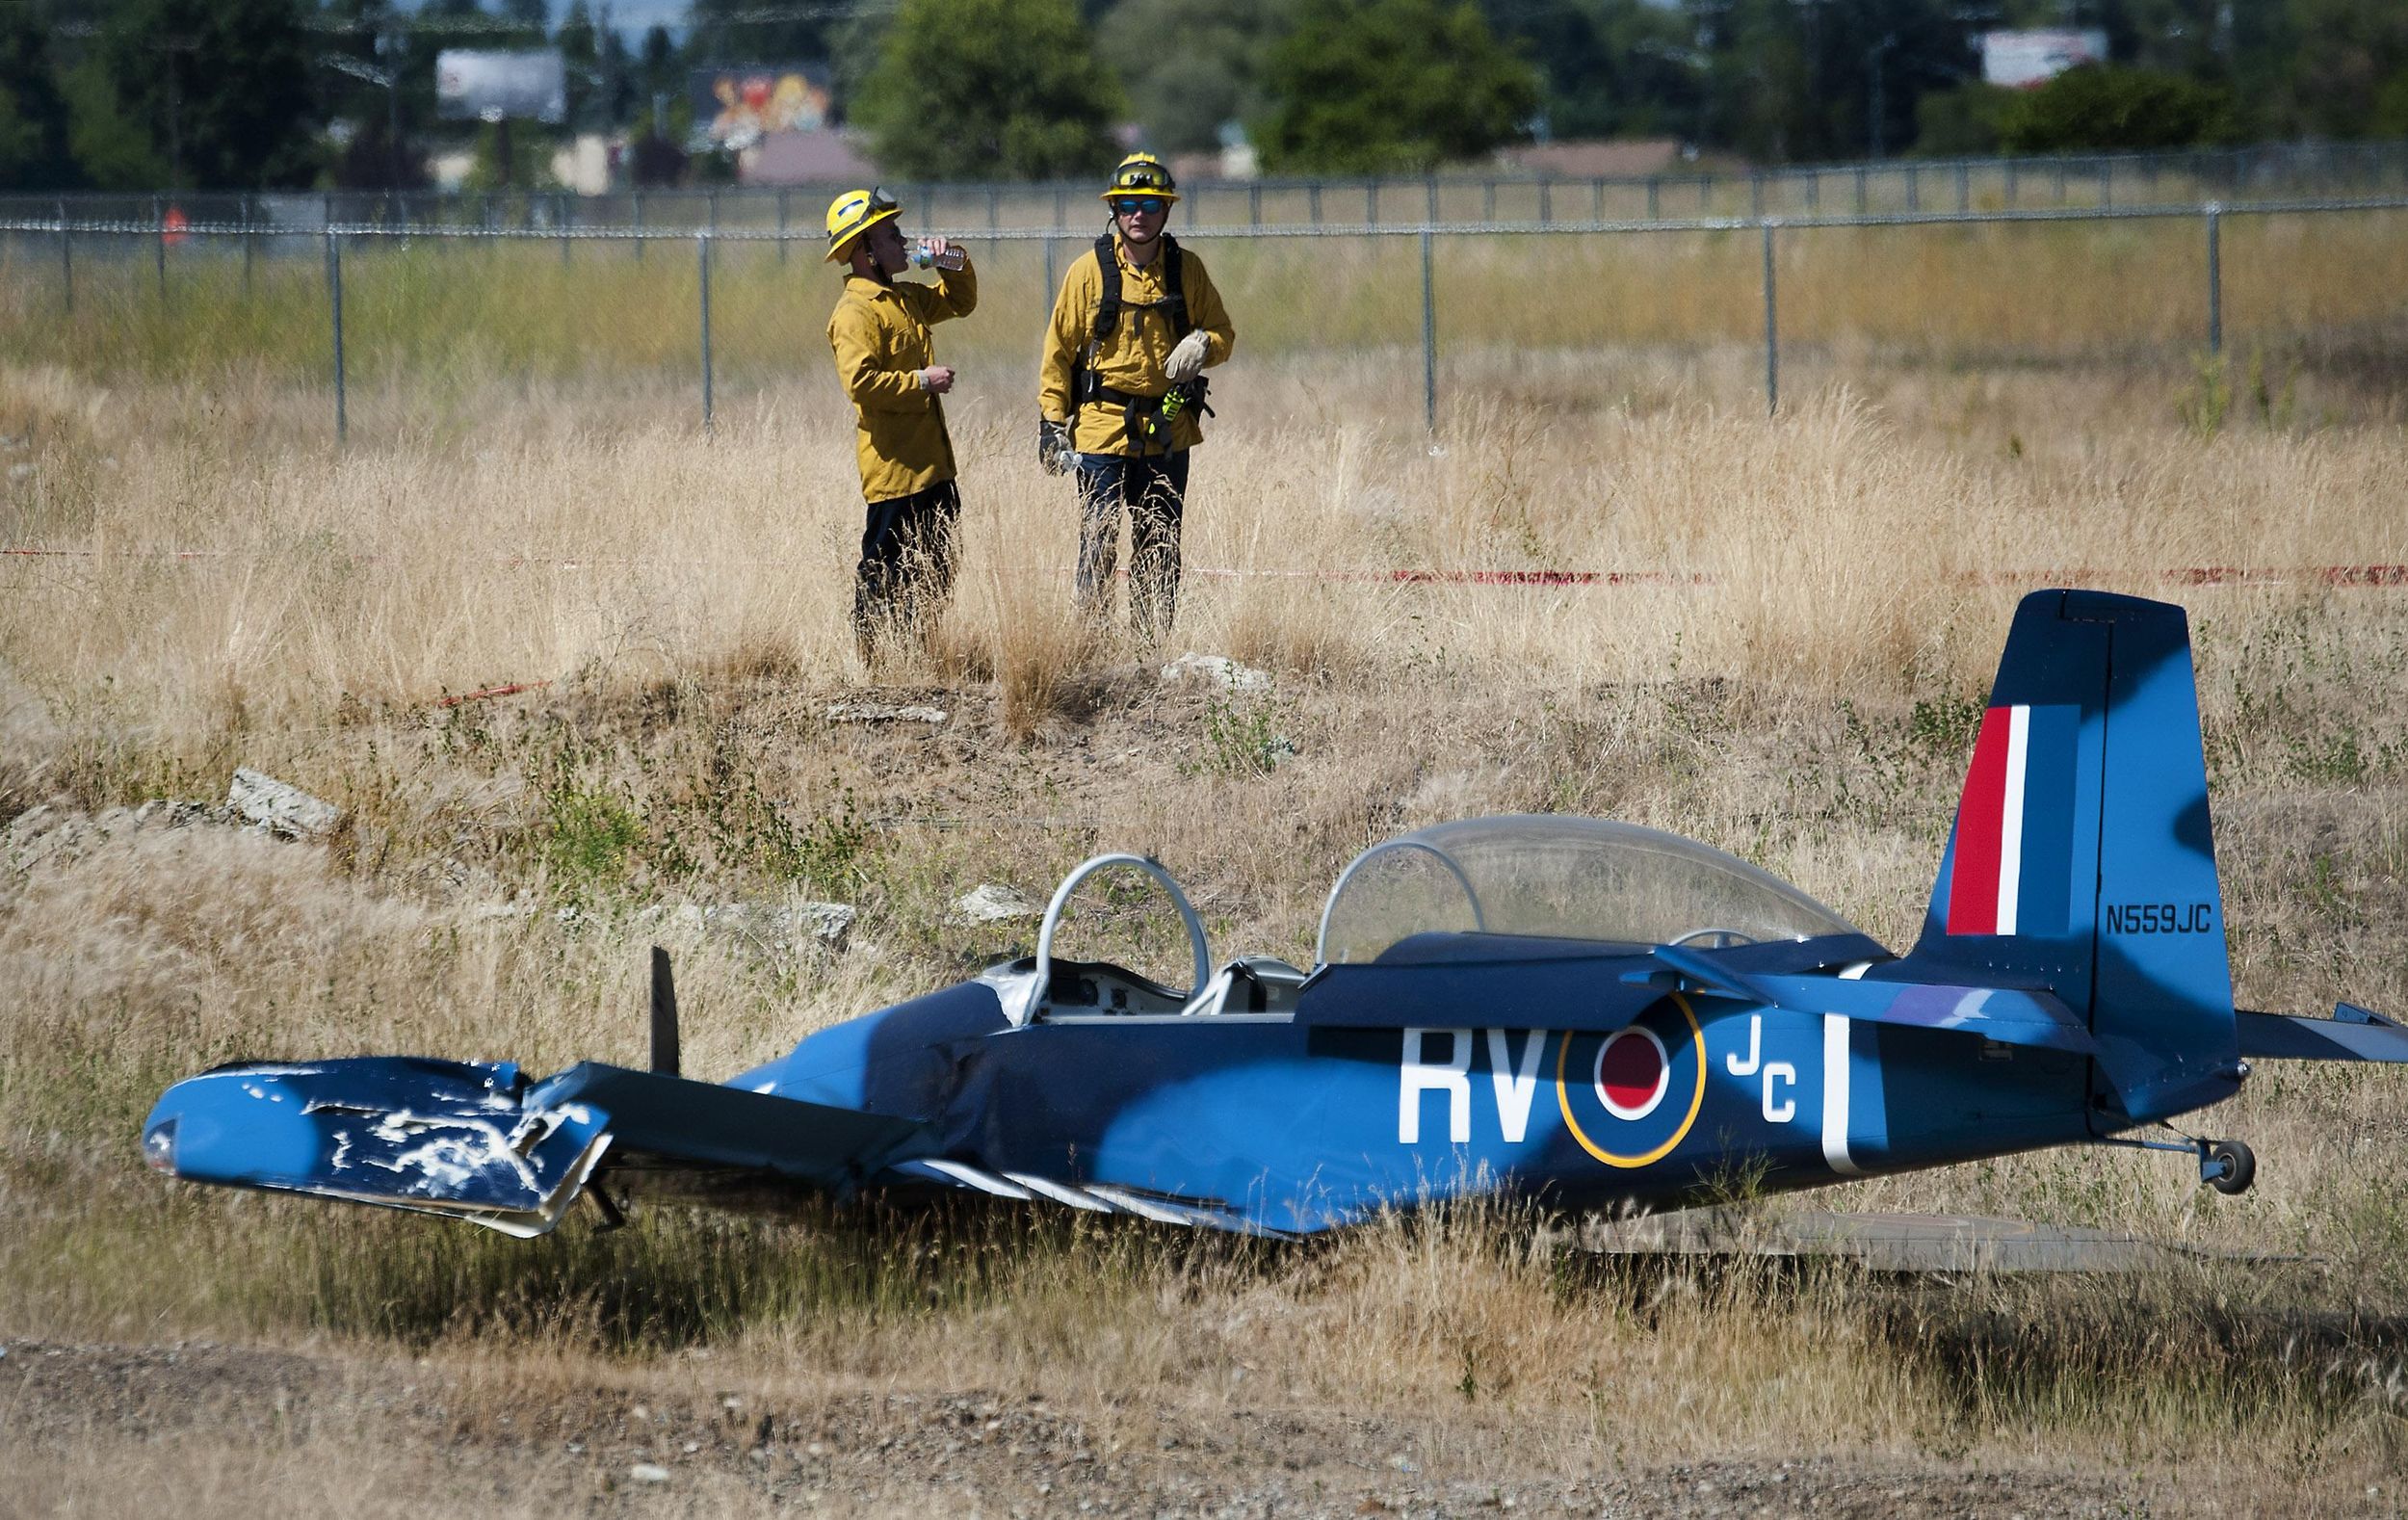 Small plane crashed in field near Hillyard; pilot sustained only minor